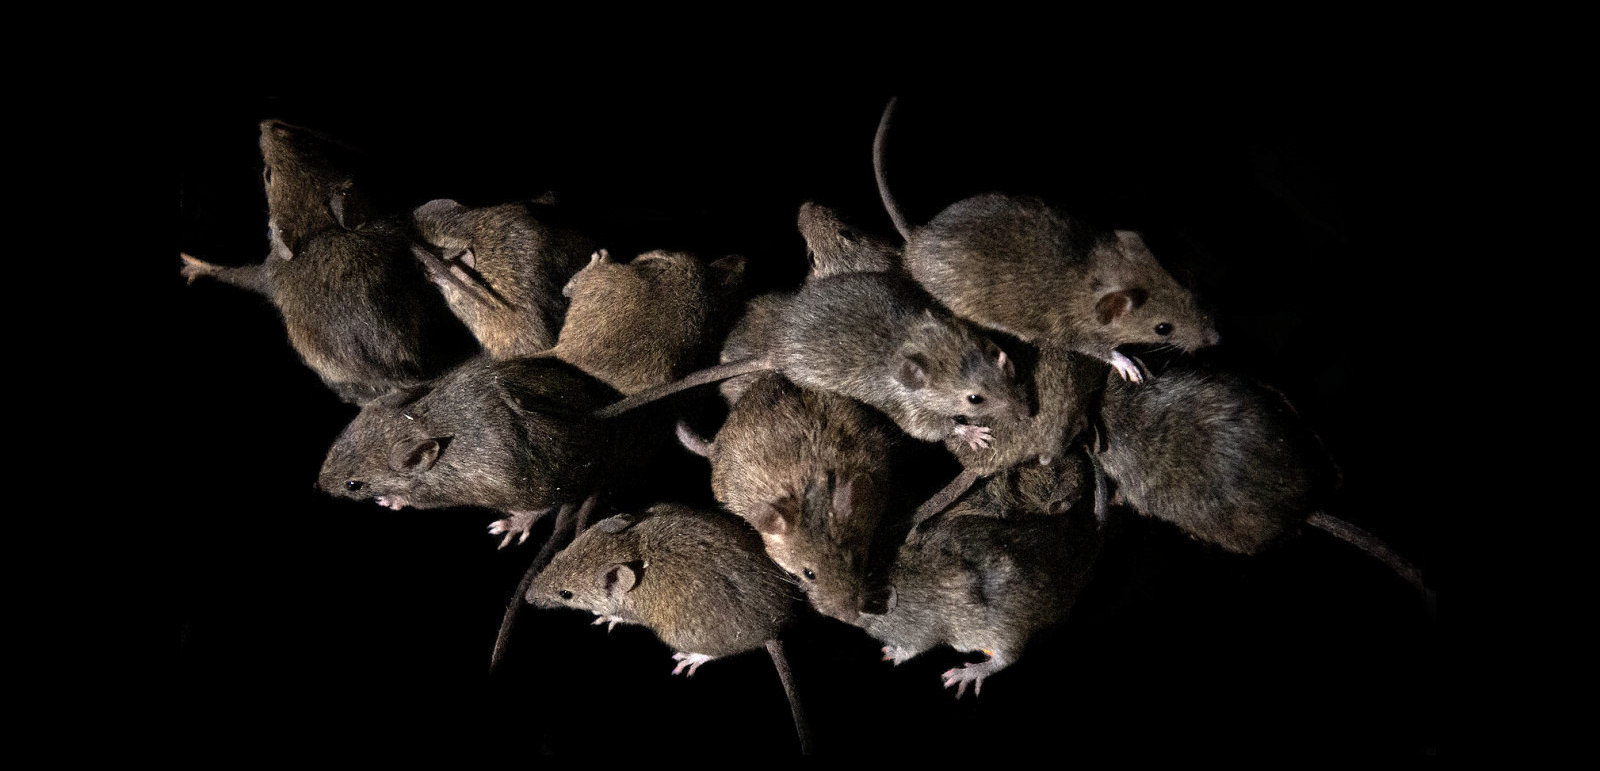 Mice infestation illustrating commercial pest control for the Agricultural sector